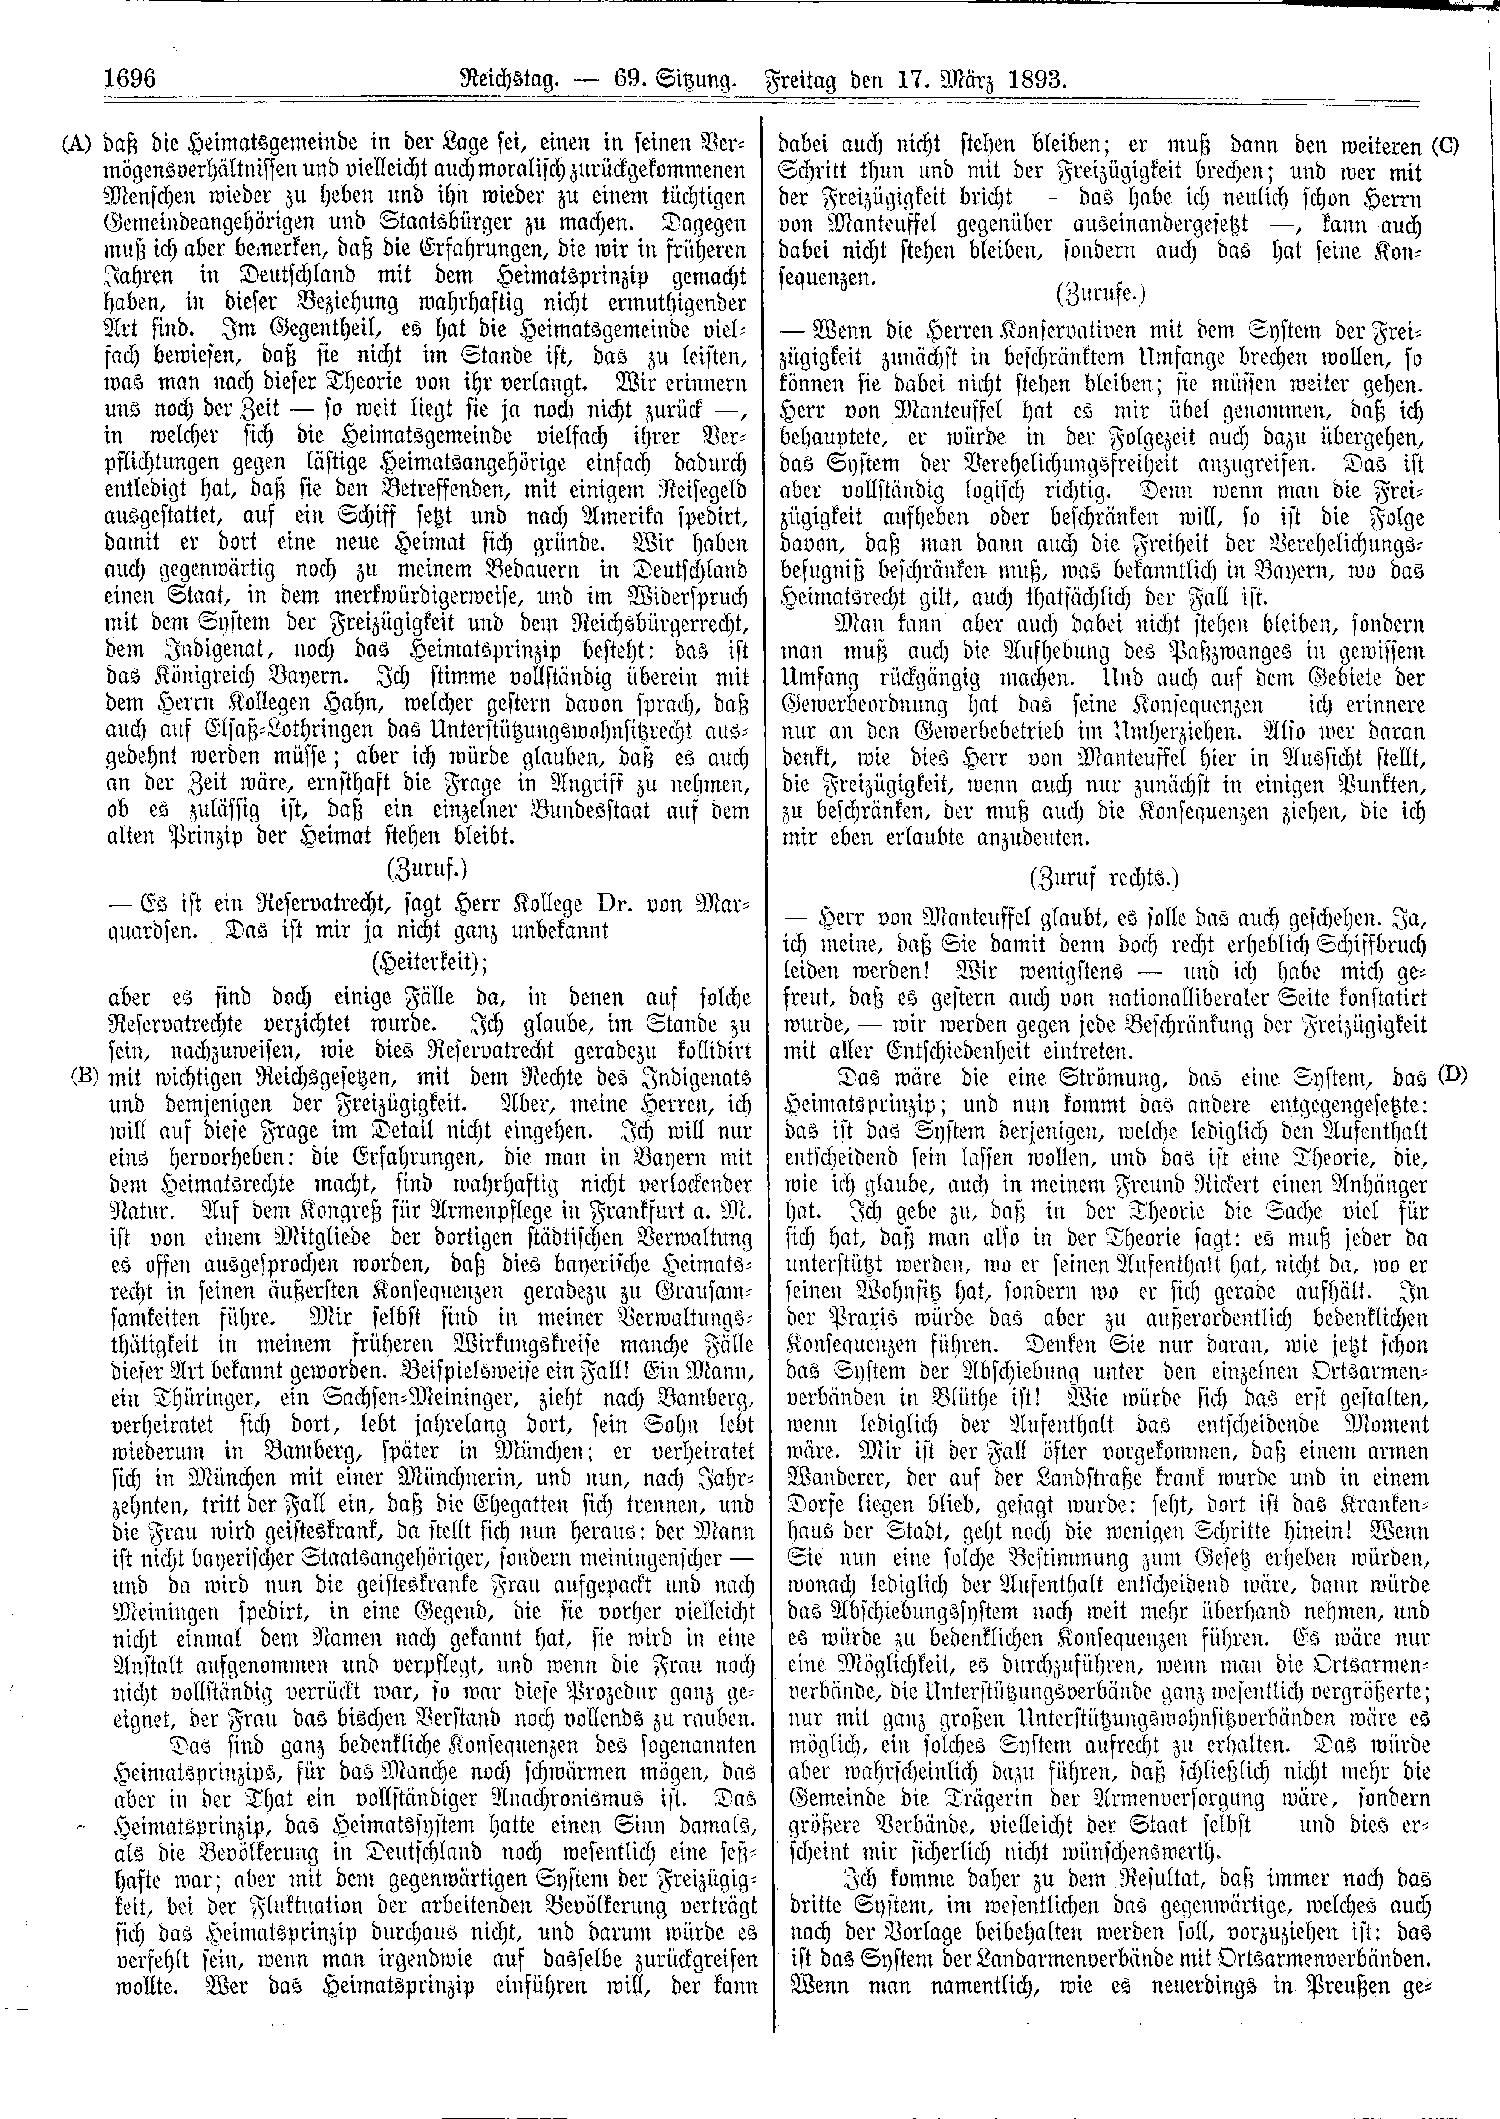 Scan of page 1696